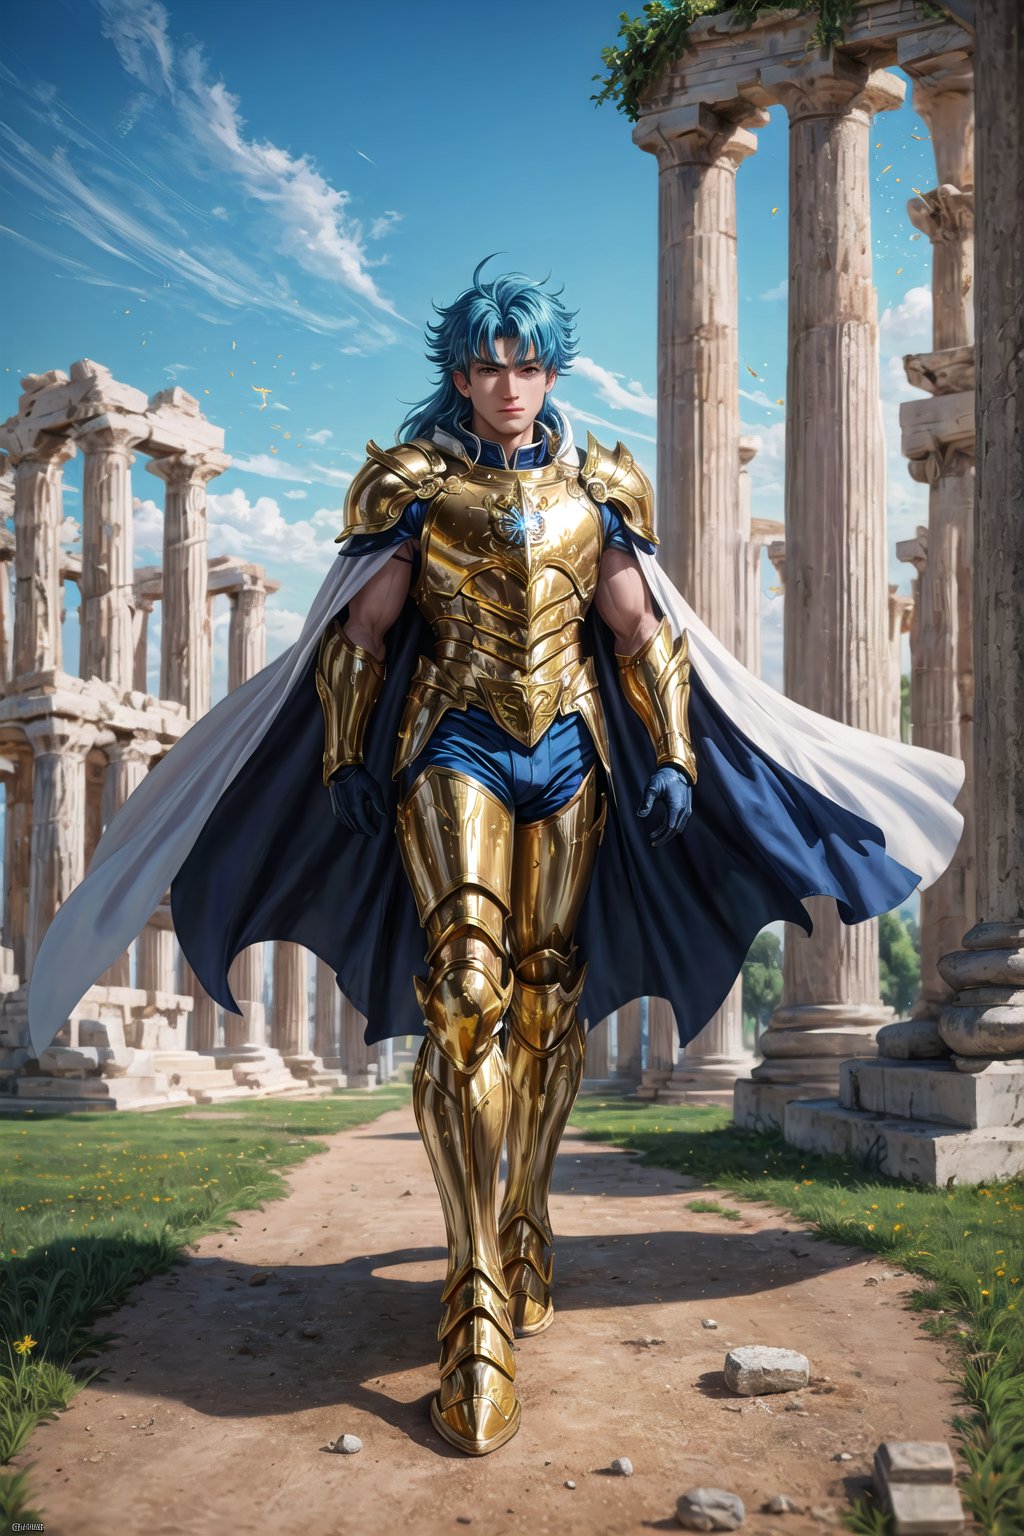 absurdres, highres, ultra detailed,Insane detail in face,  (boy:1.3), Gold Saint, Saint Seiya Style, Gold Armor, Full body armor, no helmet, Zodiac Knights, White long cape, blue hair,  fighting pose,Pokemon Gotcha Style, gold gloves, long hair, white cape, messy_hair,  Gold eyes, black pants under armor, full body armor, beautiful old greek temple in the background, beautiful fields, full leg armor,